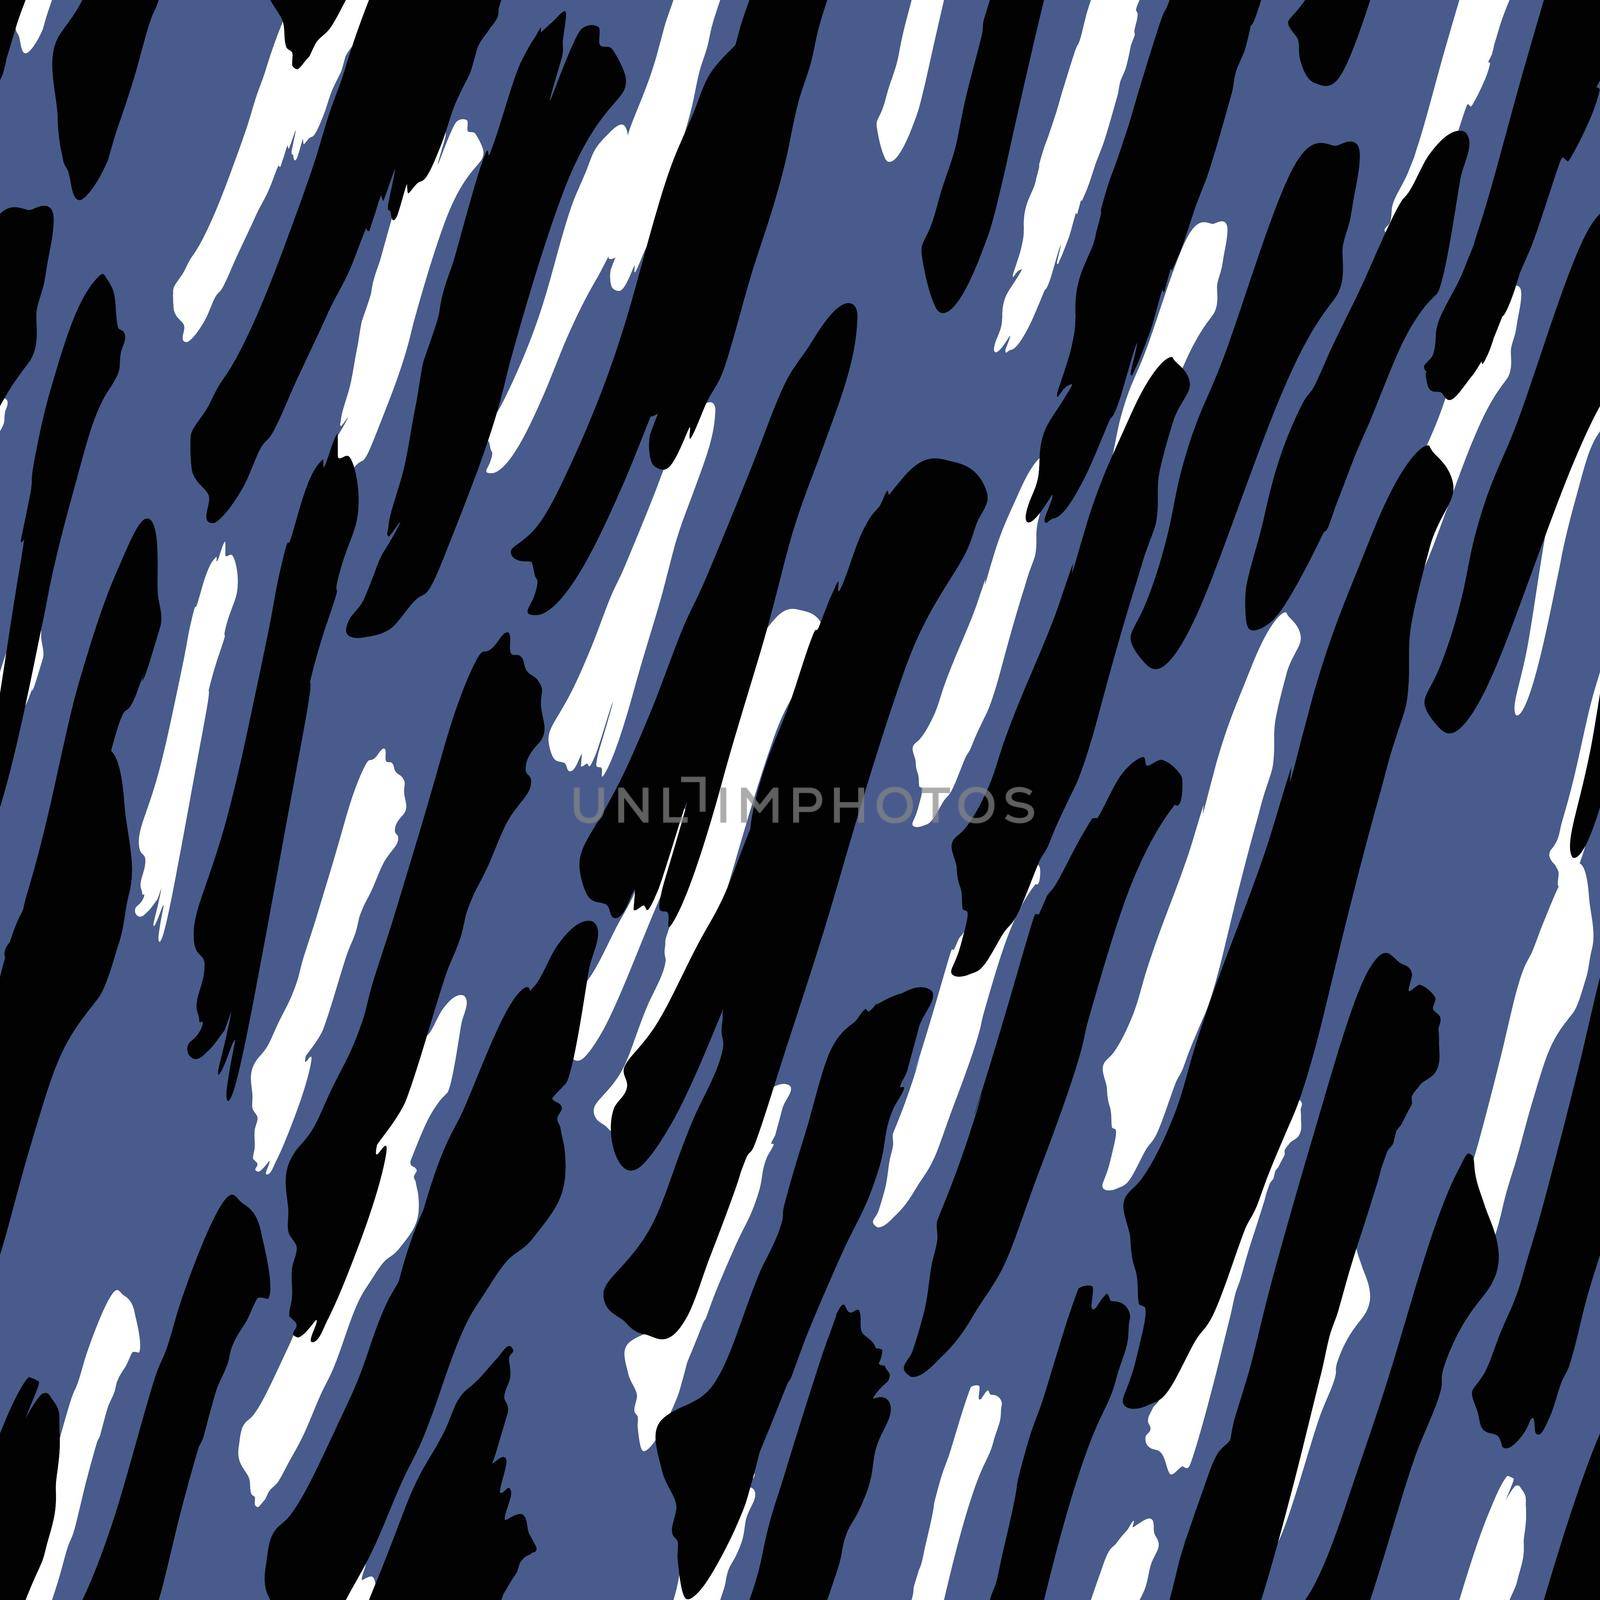 Abstract modern giraffe seamless pattern. Animals trendy background. Blue and black decorative vector stock illustration for print, card, postcard, fabric, textile. Modern ornament of stylized skin by allaku